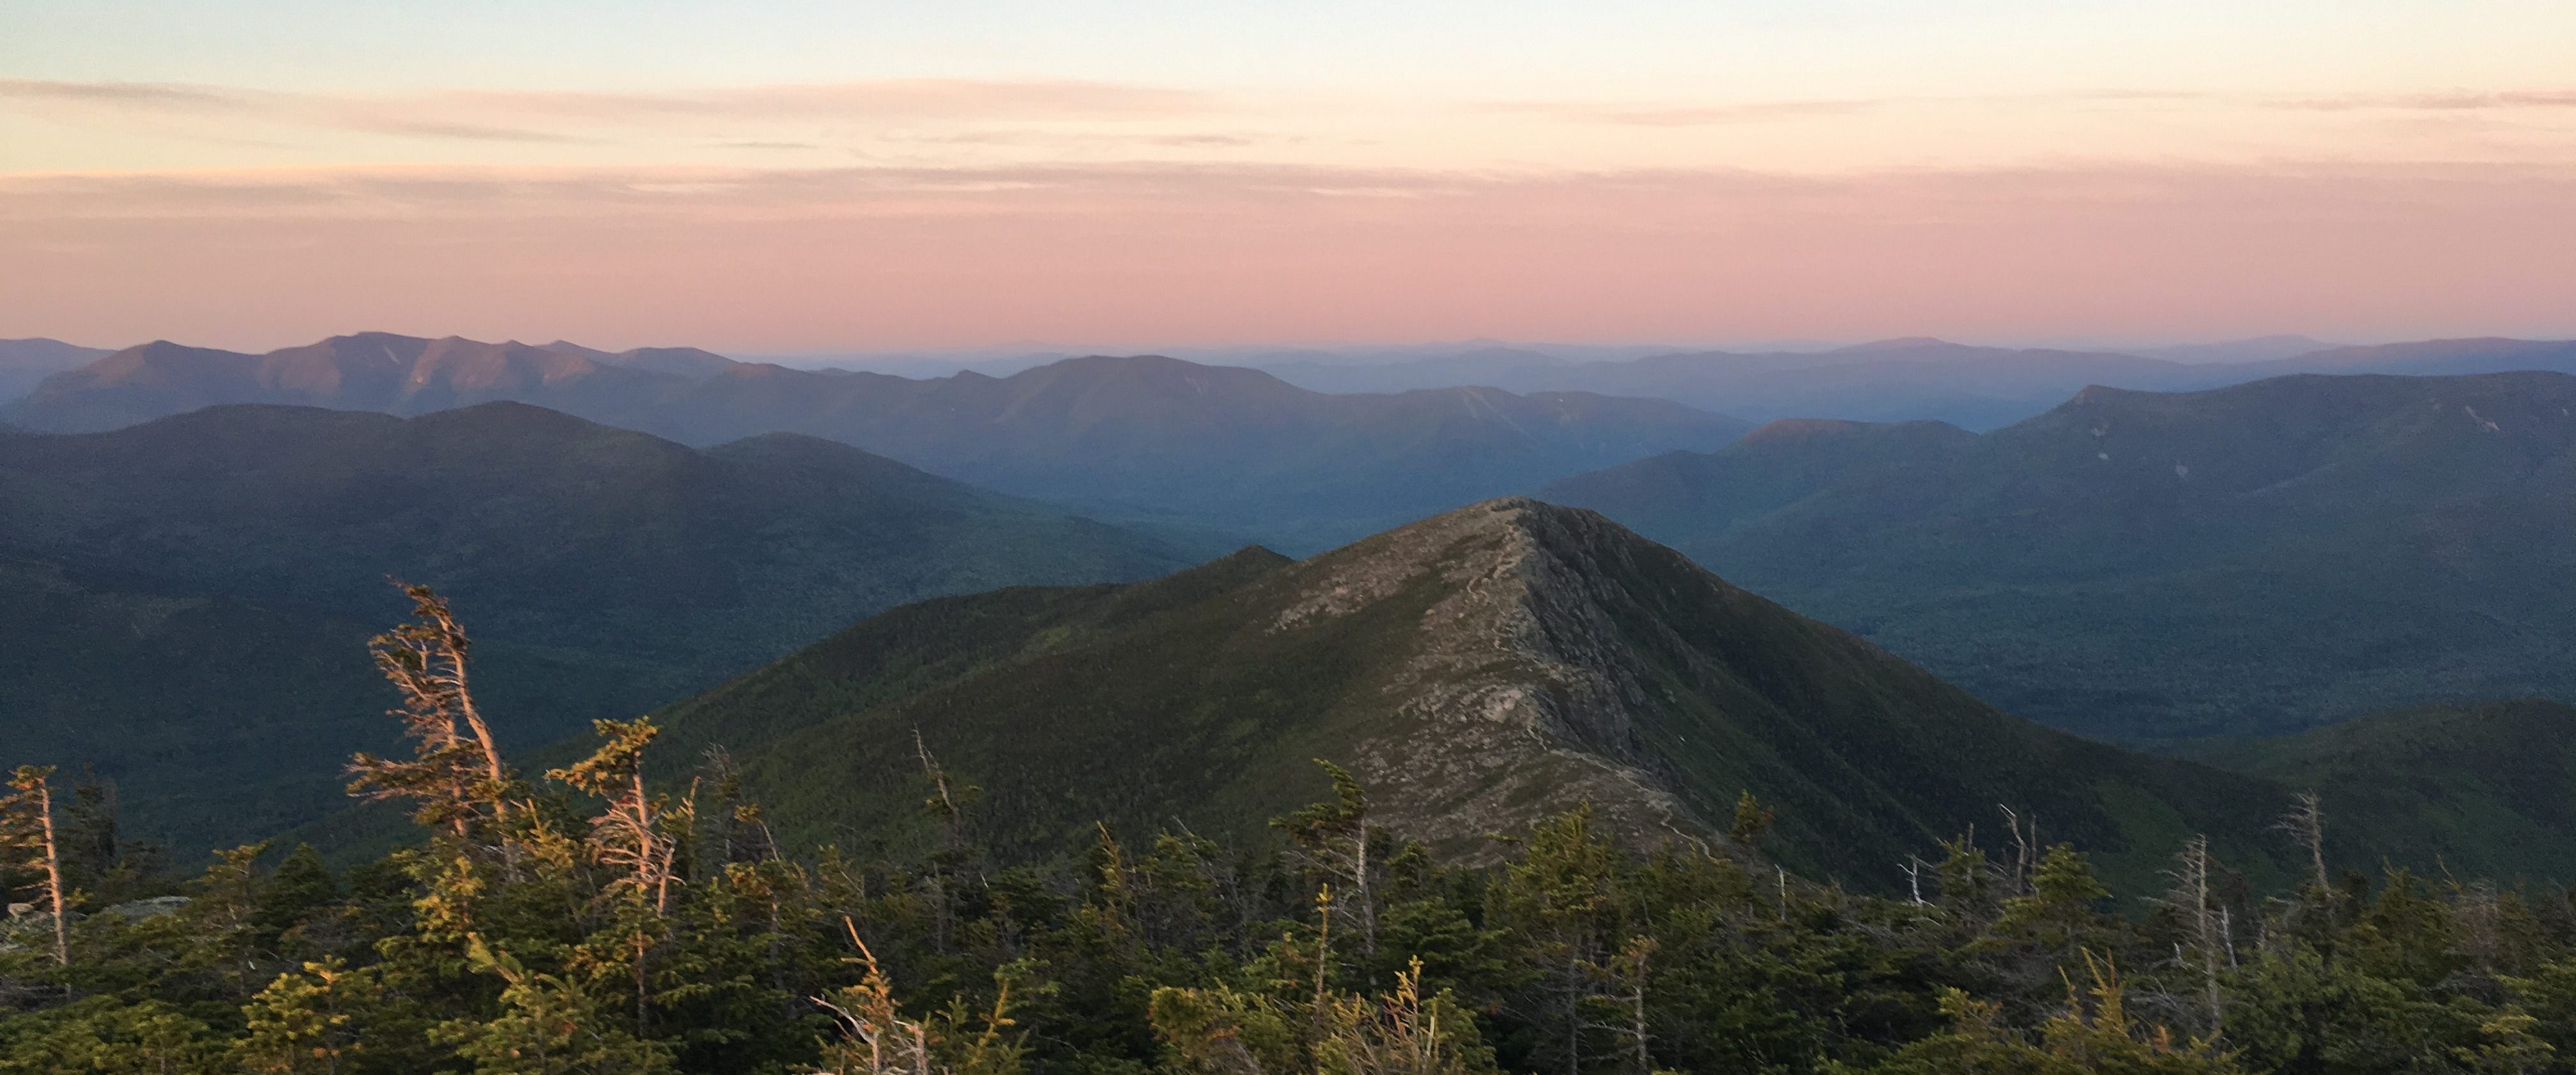 The Complete Guide to The Pemi Loop | The Best of NH’s White Mountains